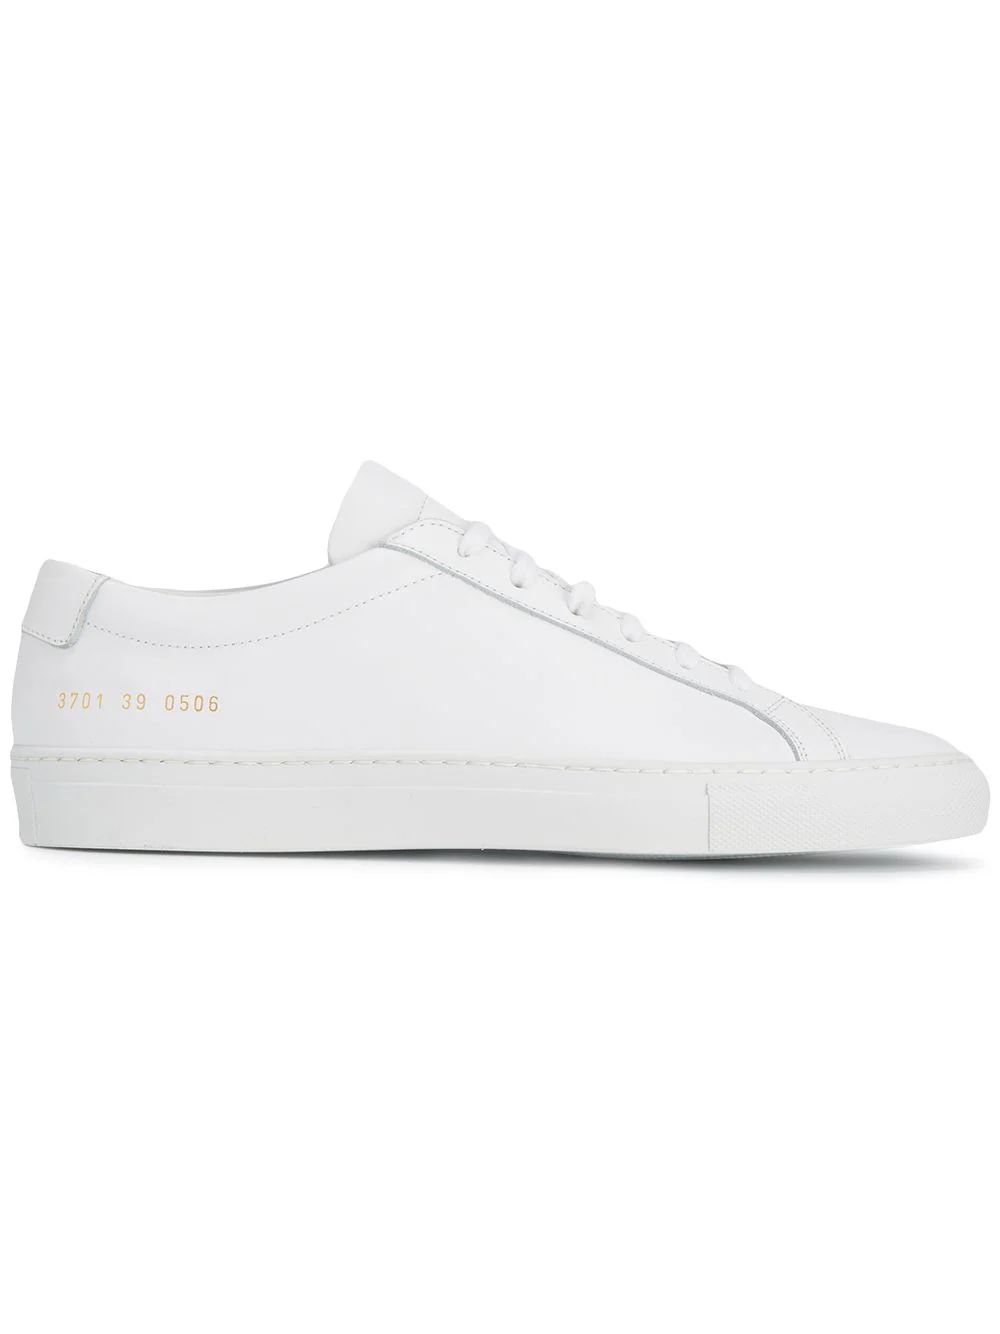 Common Projects Original Achilles leather sneakers - White | FarFetch Global